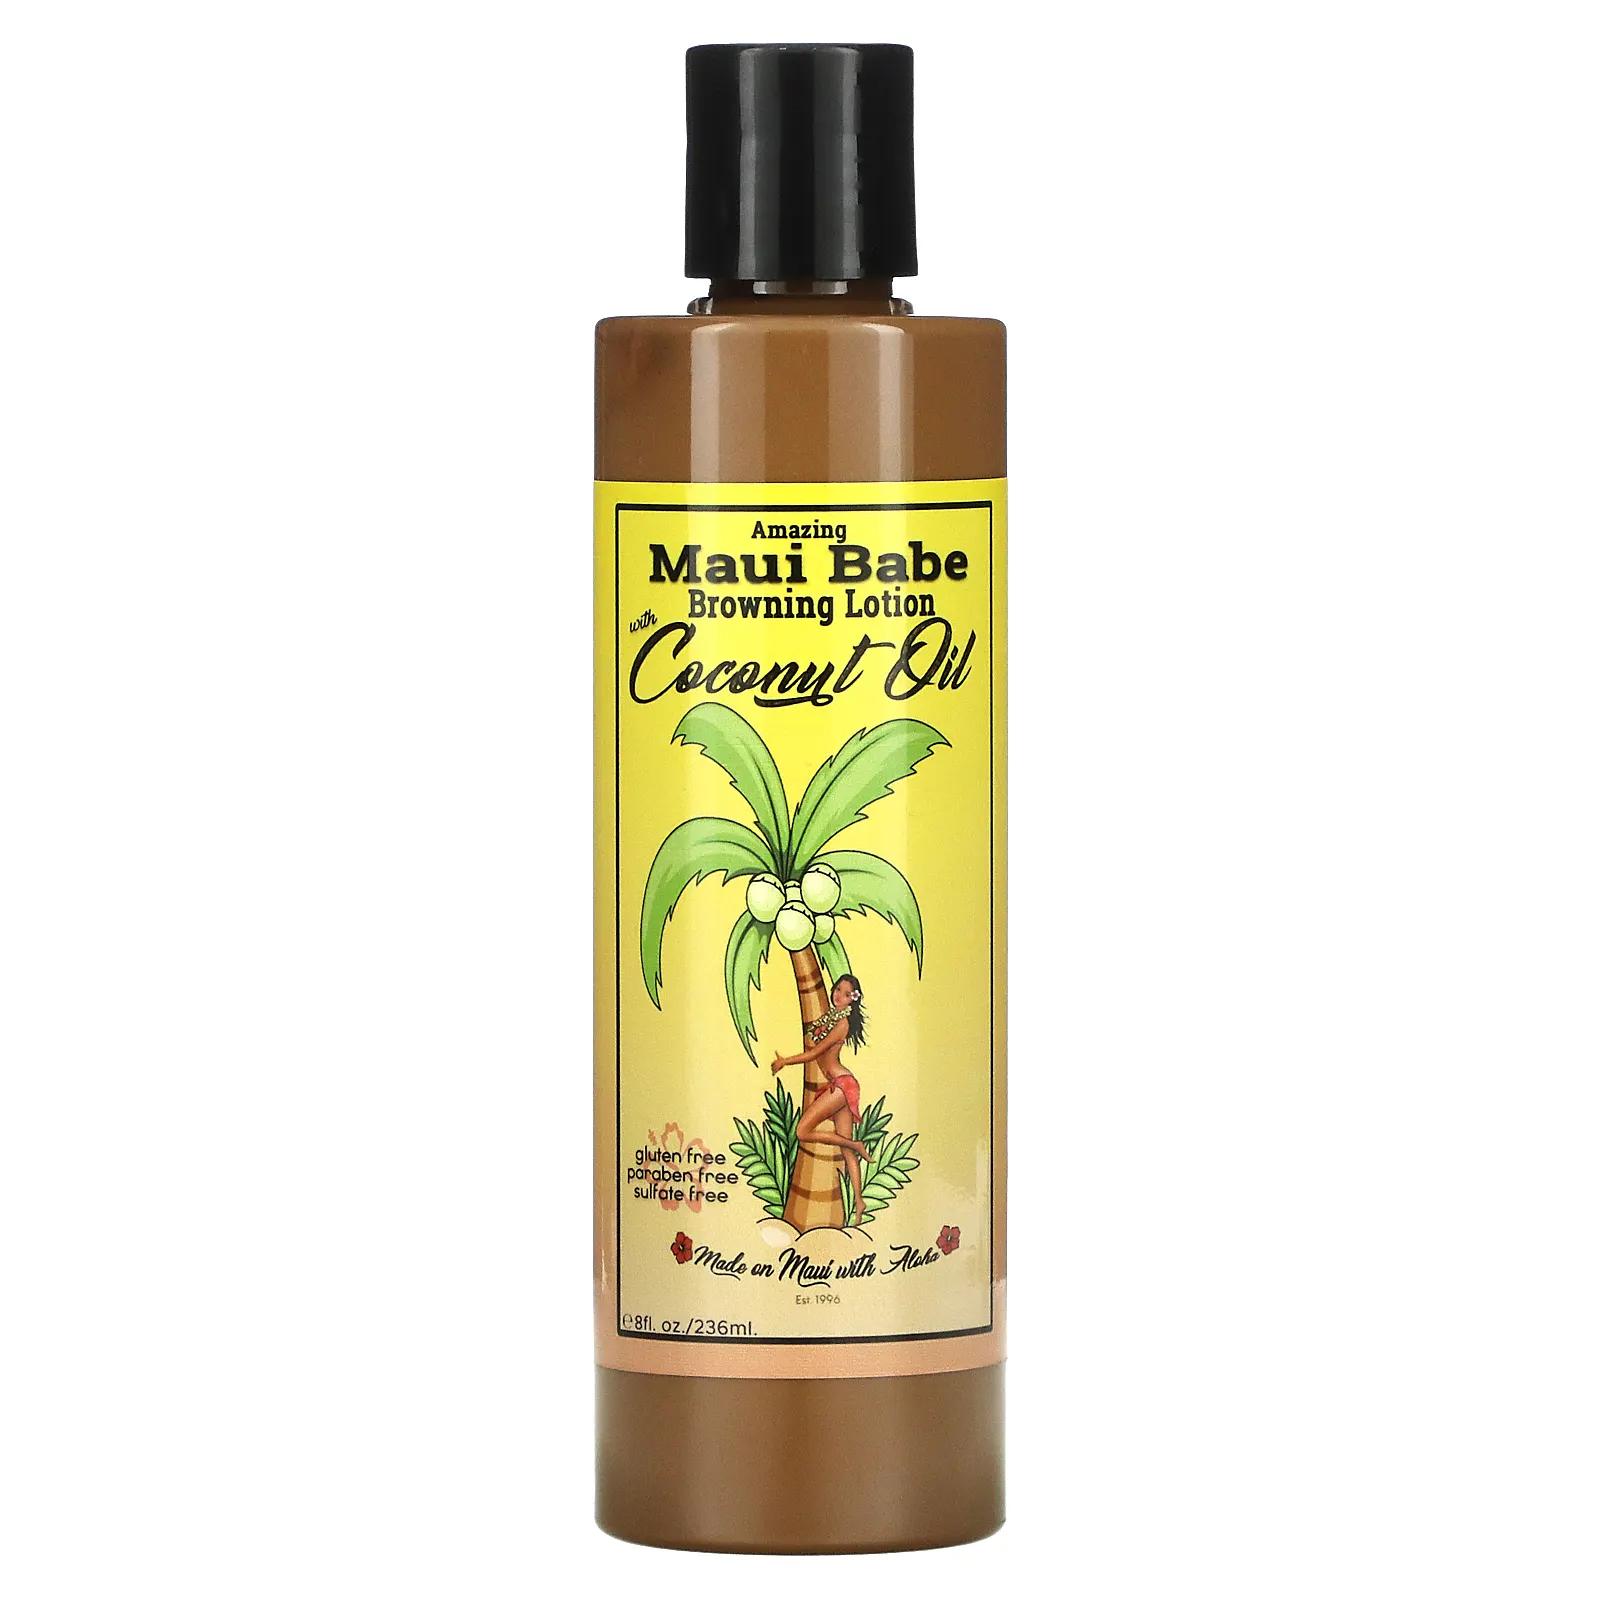 Maui Babe Amazing Browning Lotion with Coconut Oil 8 fl oz (236 ml) лосьон maui babe after browning для улучшения загара 236 мл